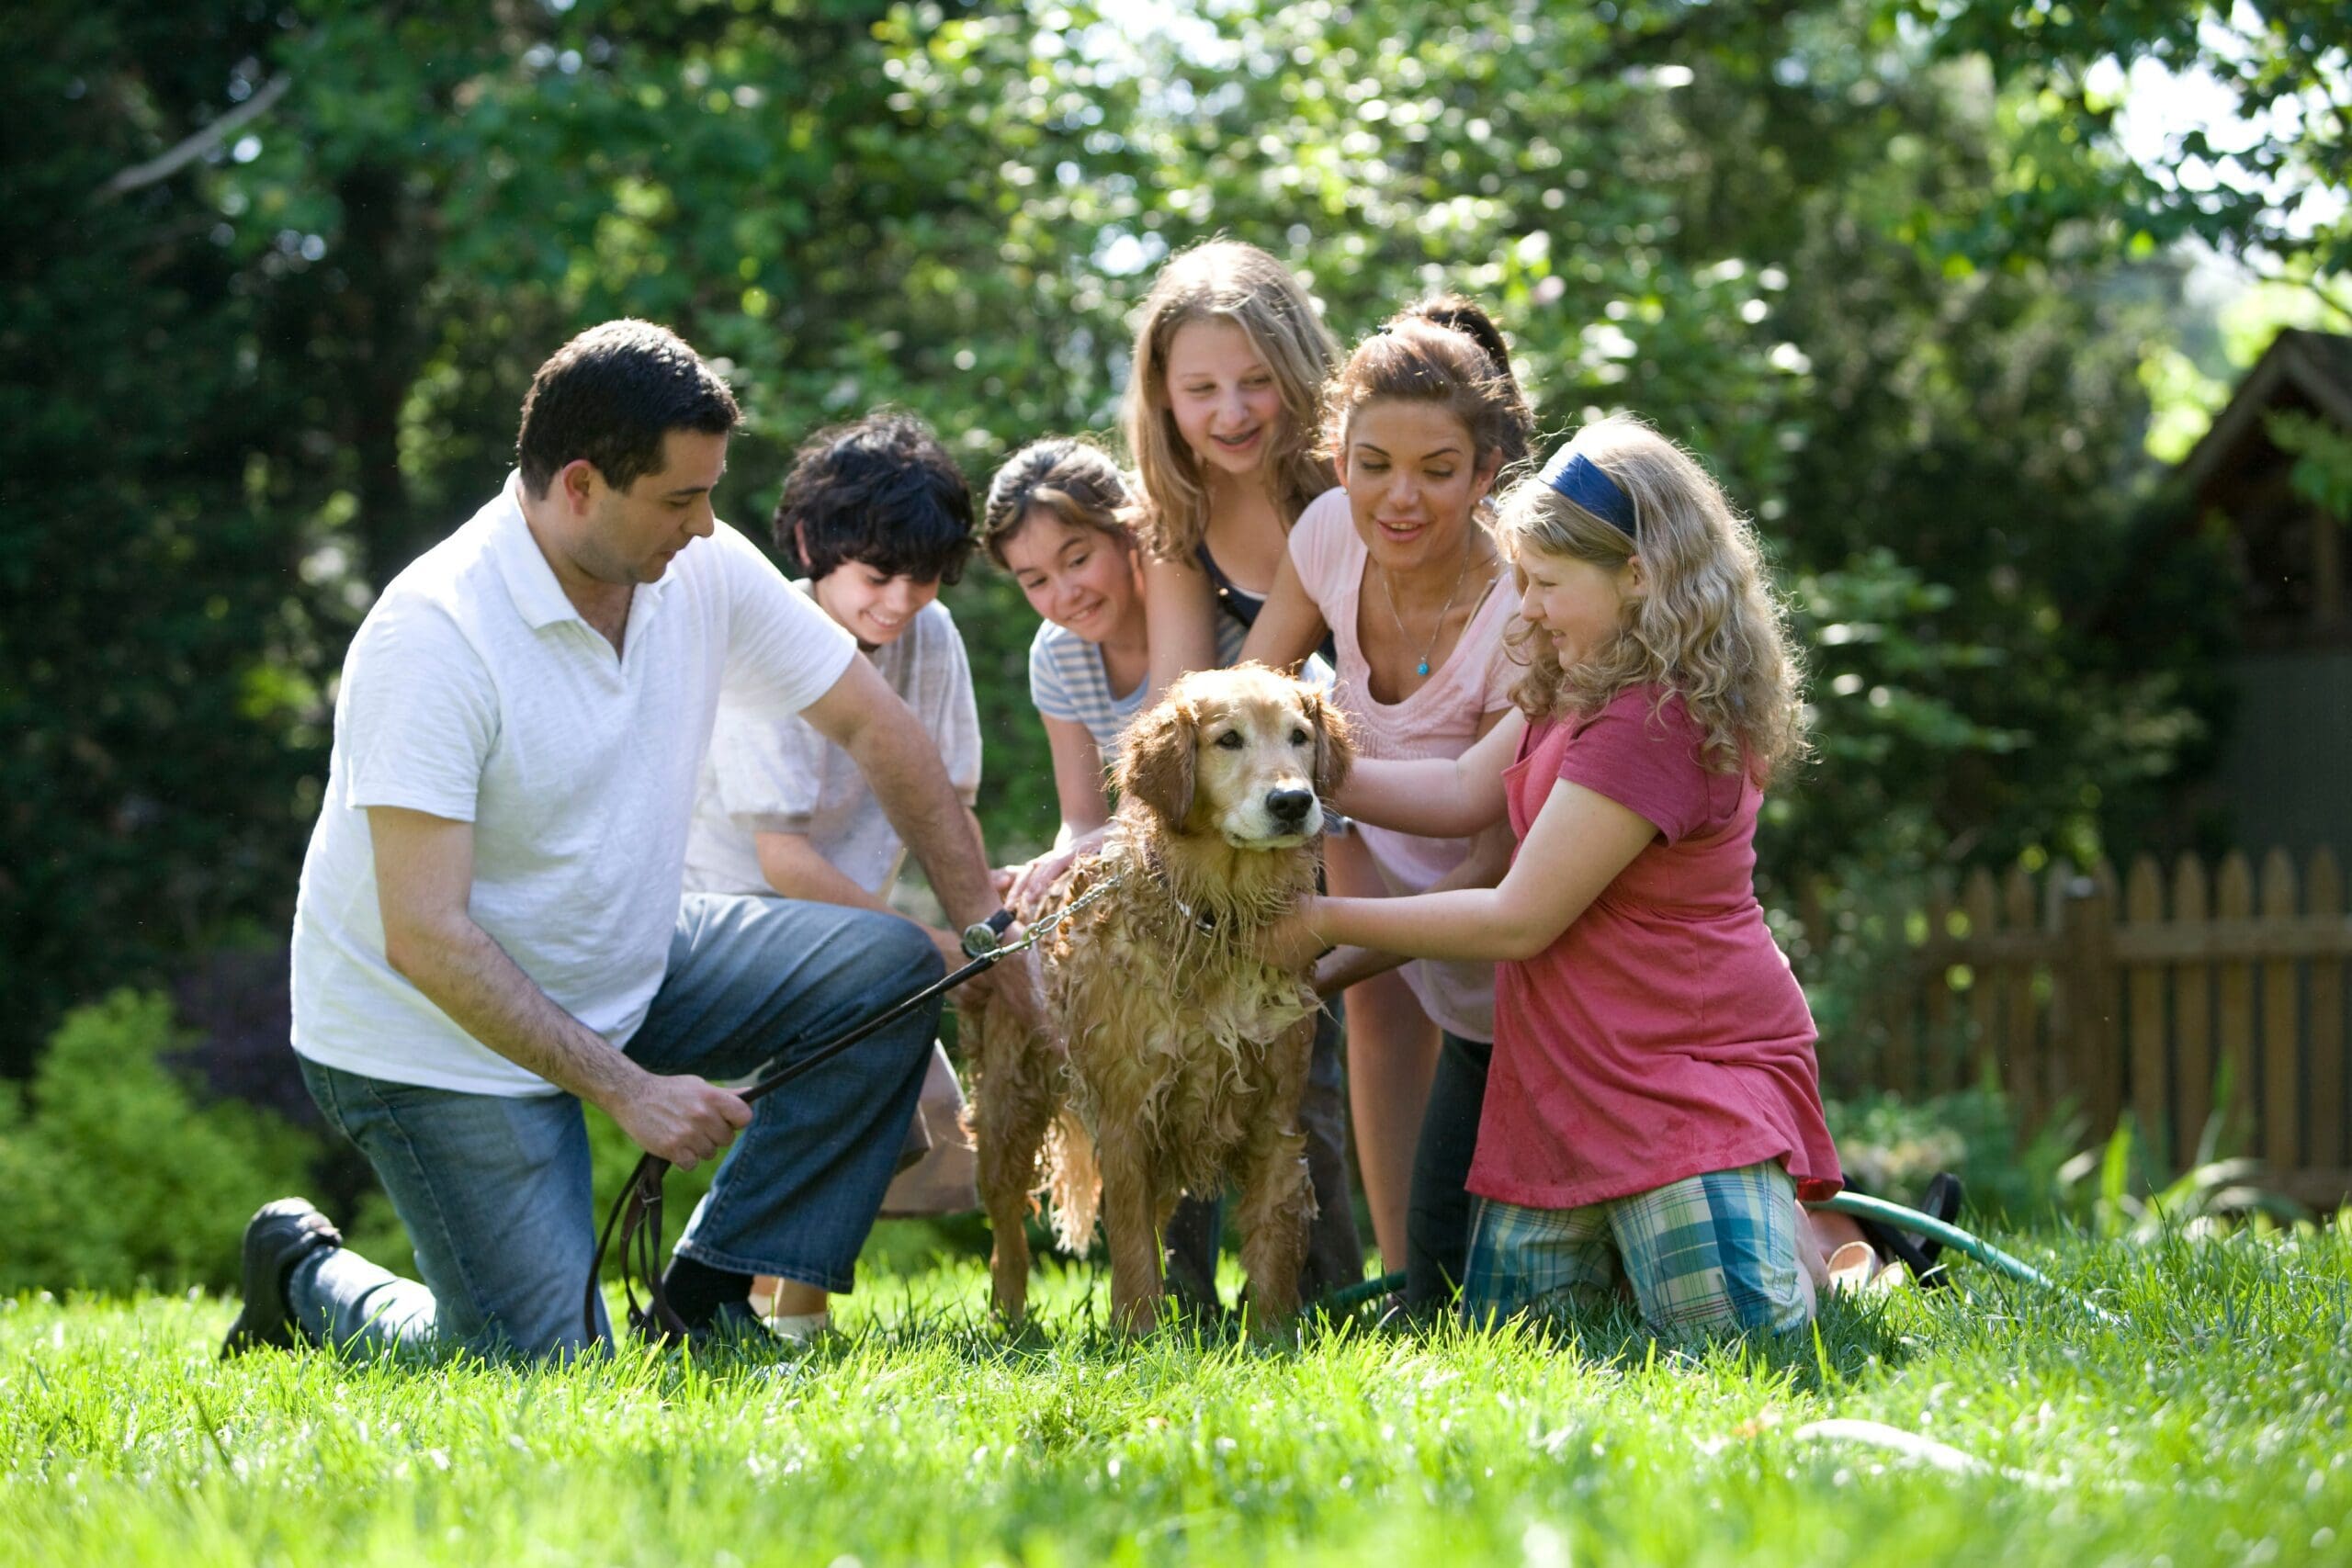 A joyful family gathered around their beloved dog in the backyard, showcasing the love and unity that forms the foundation of family life.